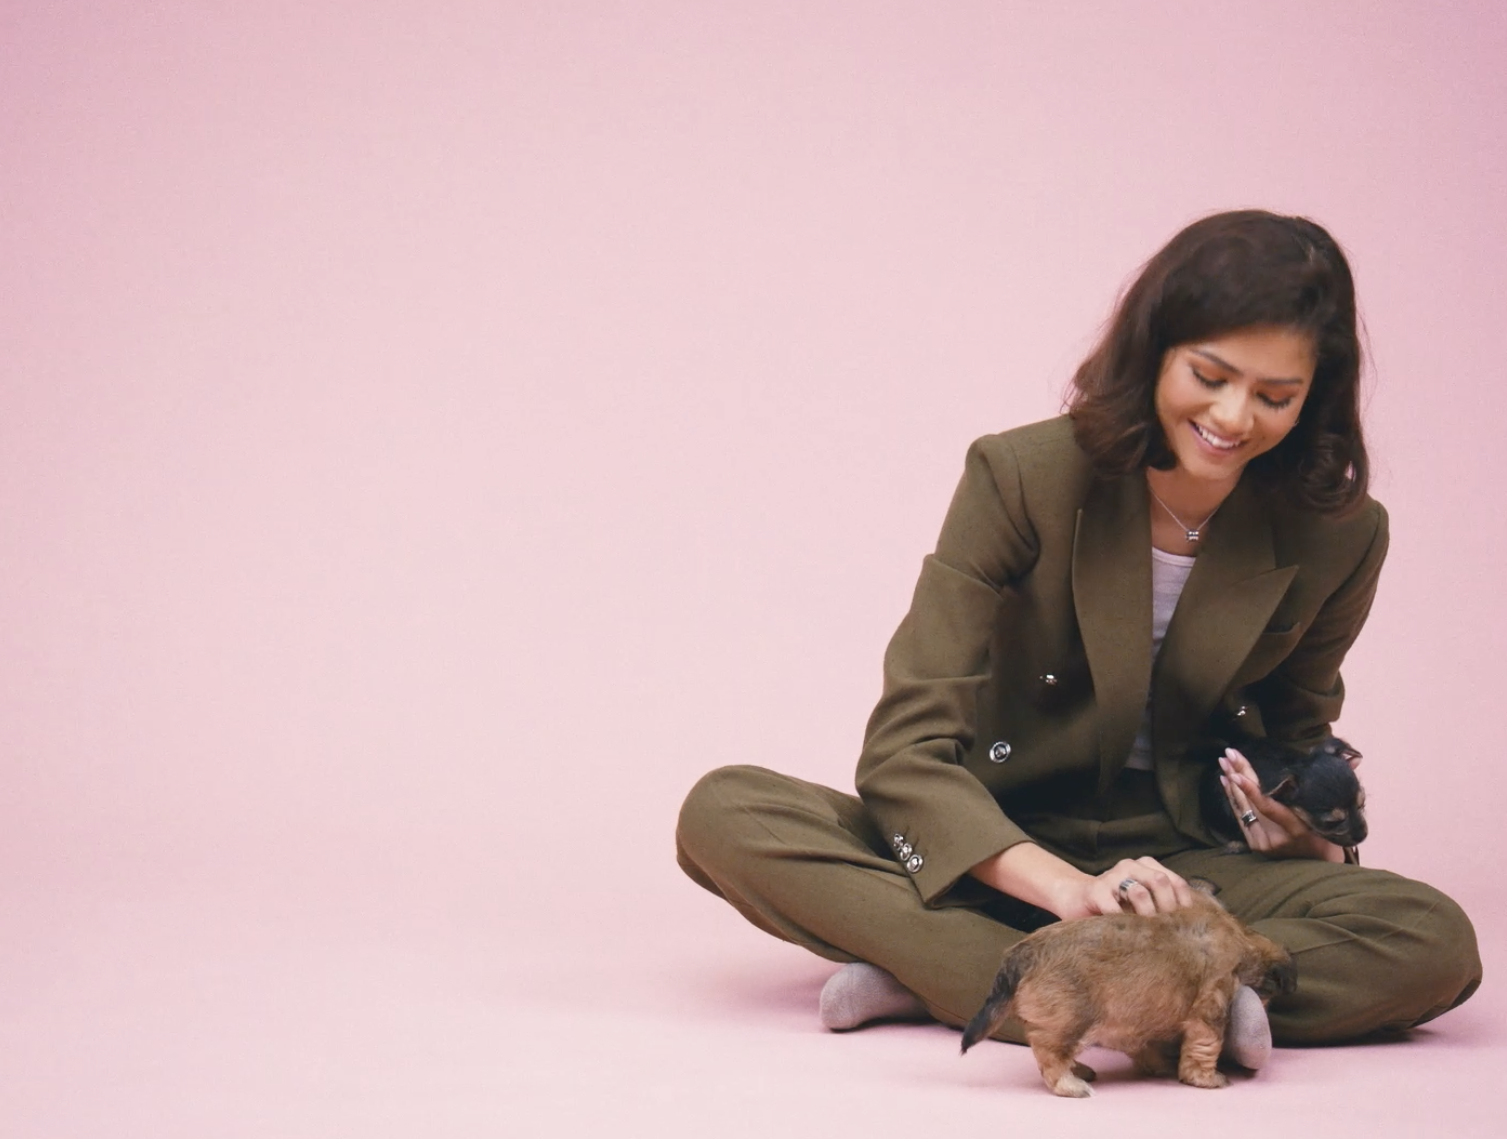 Zendaya, in a pantsuit, kneels and pets a puppy on a pink backdrop, with &quot;Buzzfeed CELEB&quot; logo in the corner